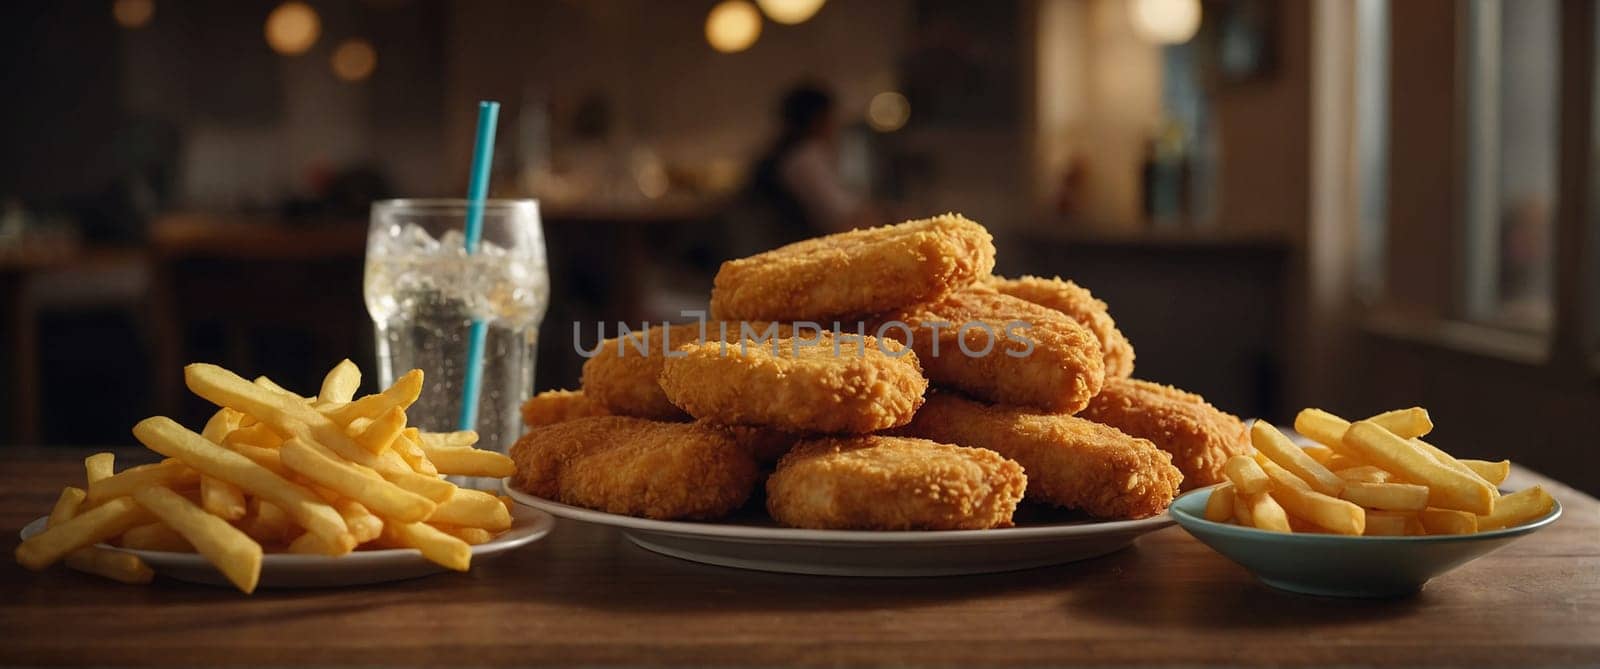 Fast-food dinner at home, burger, fries, chicken nuggets and soda, blurry background , bokeh effect by verbano